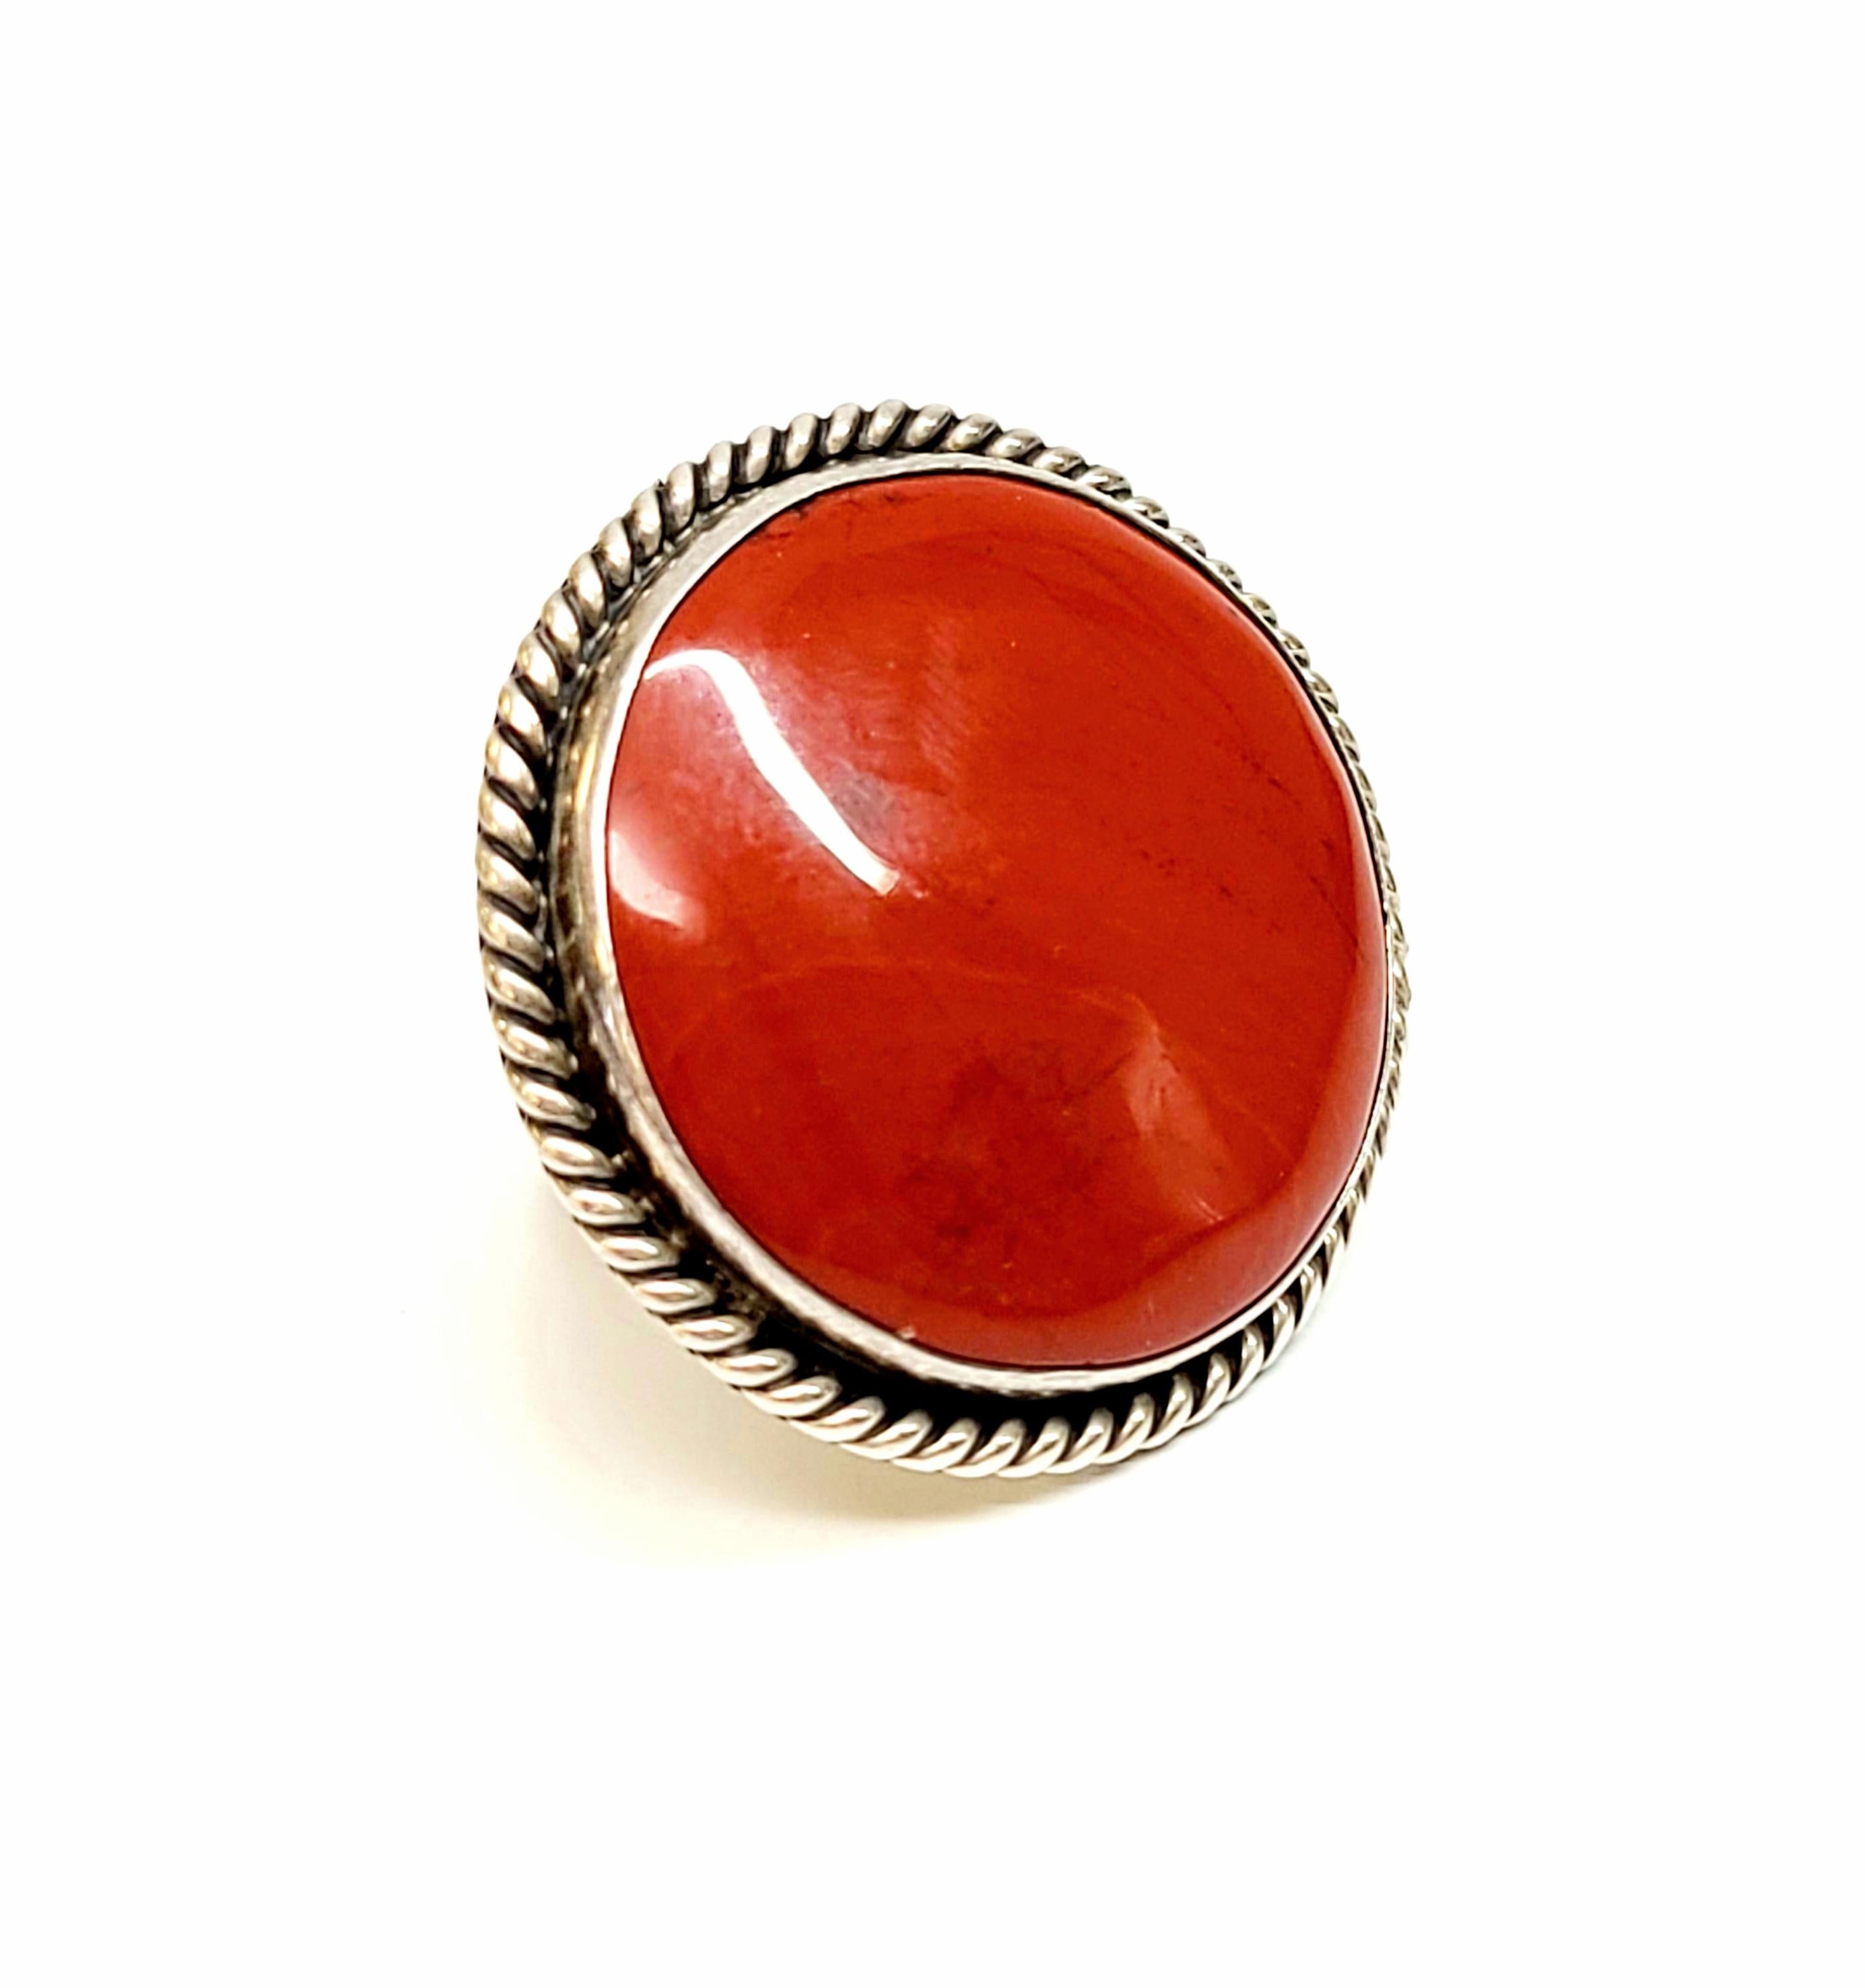 Sterling silver and red jasper ring by  Kenny B. Braken.

Size 7 3/4

This piece features a very large round red jasper cabochon bezel set in a rope edged setting.

Measures approx 1 5/8